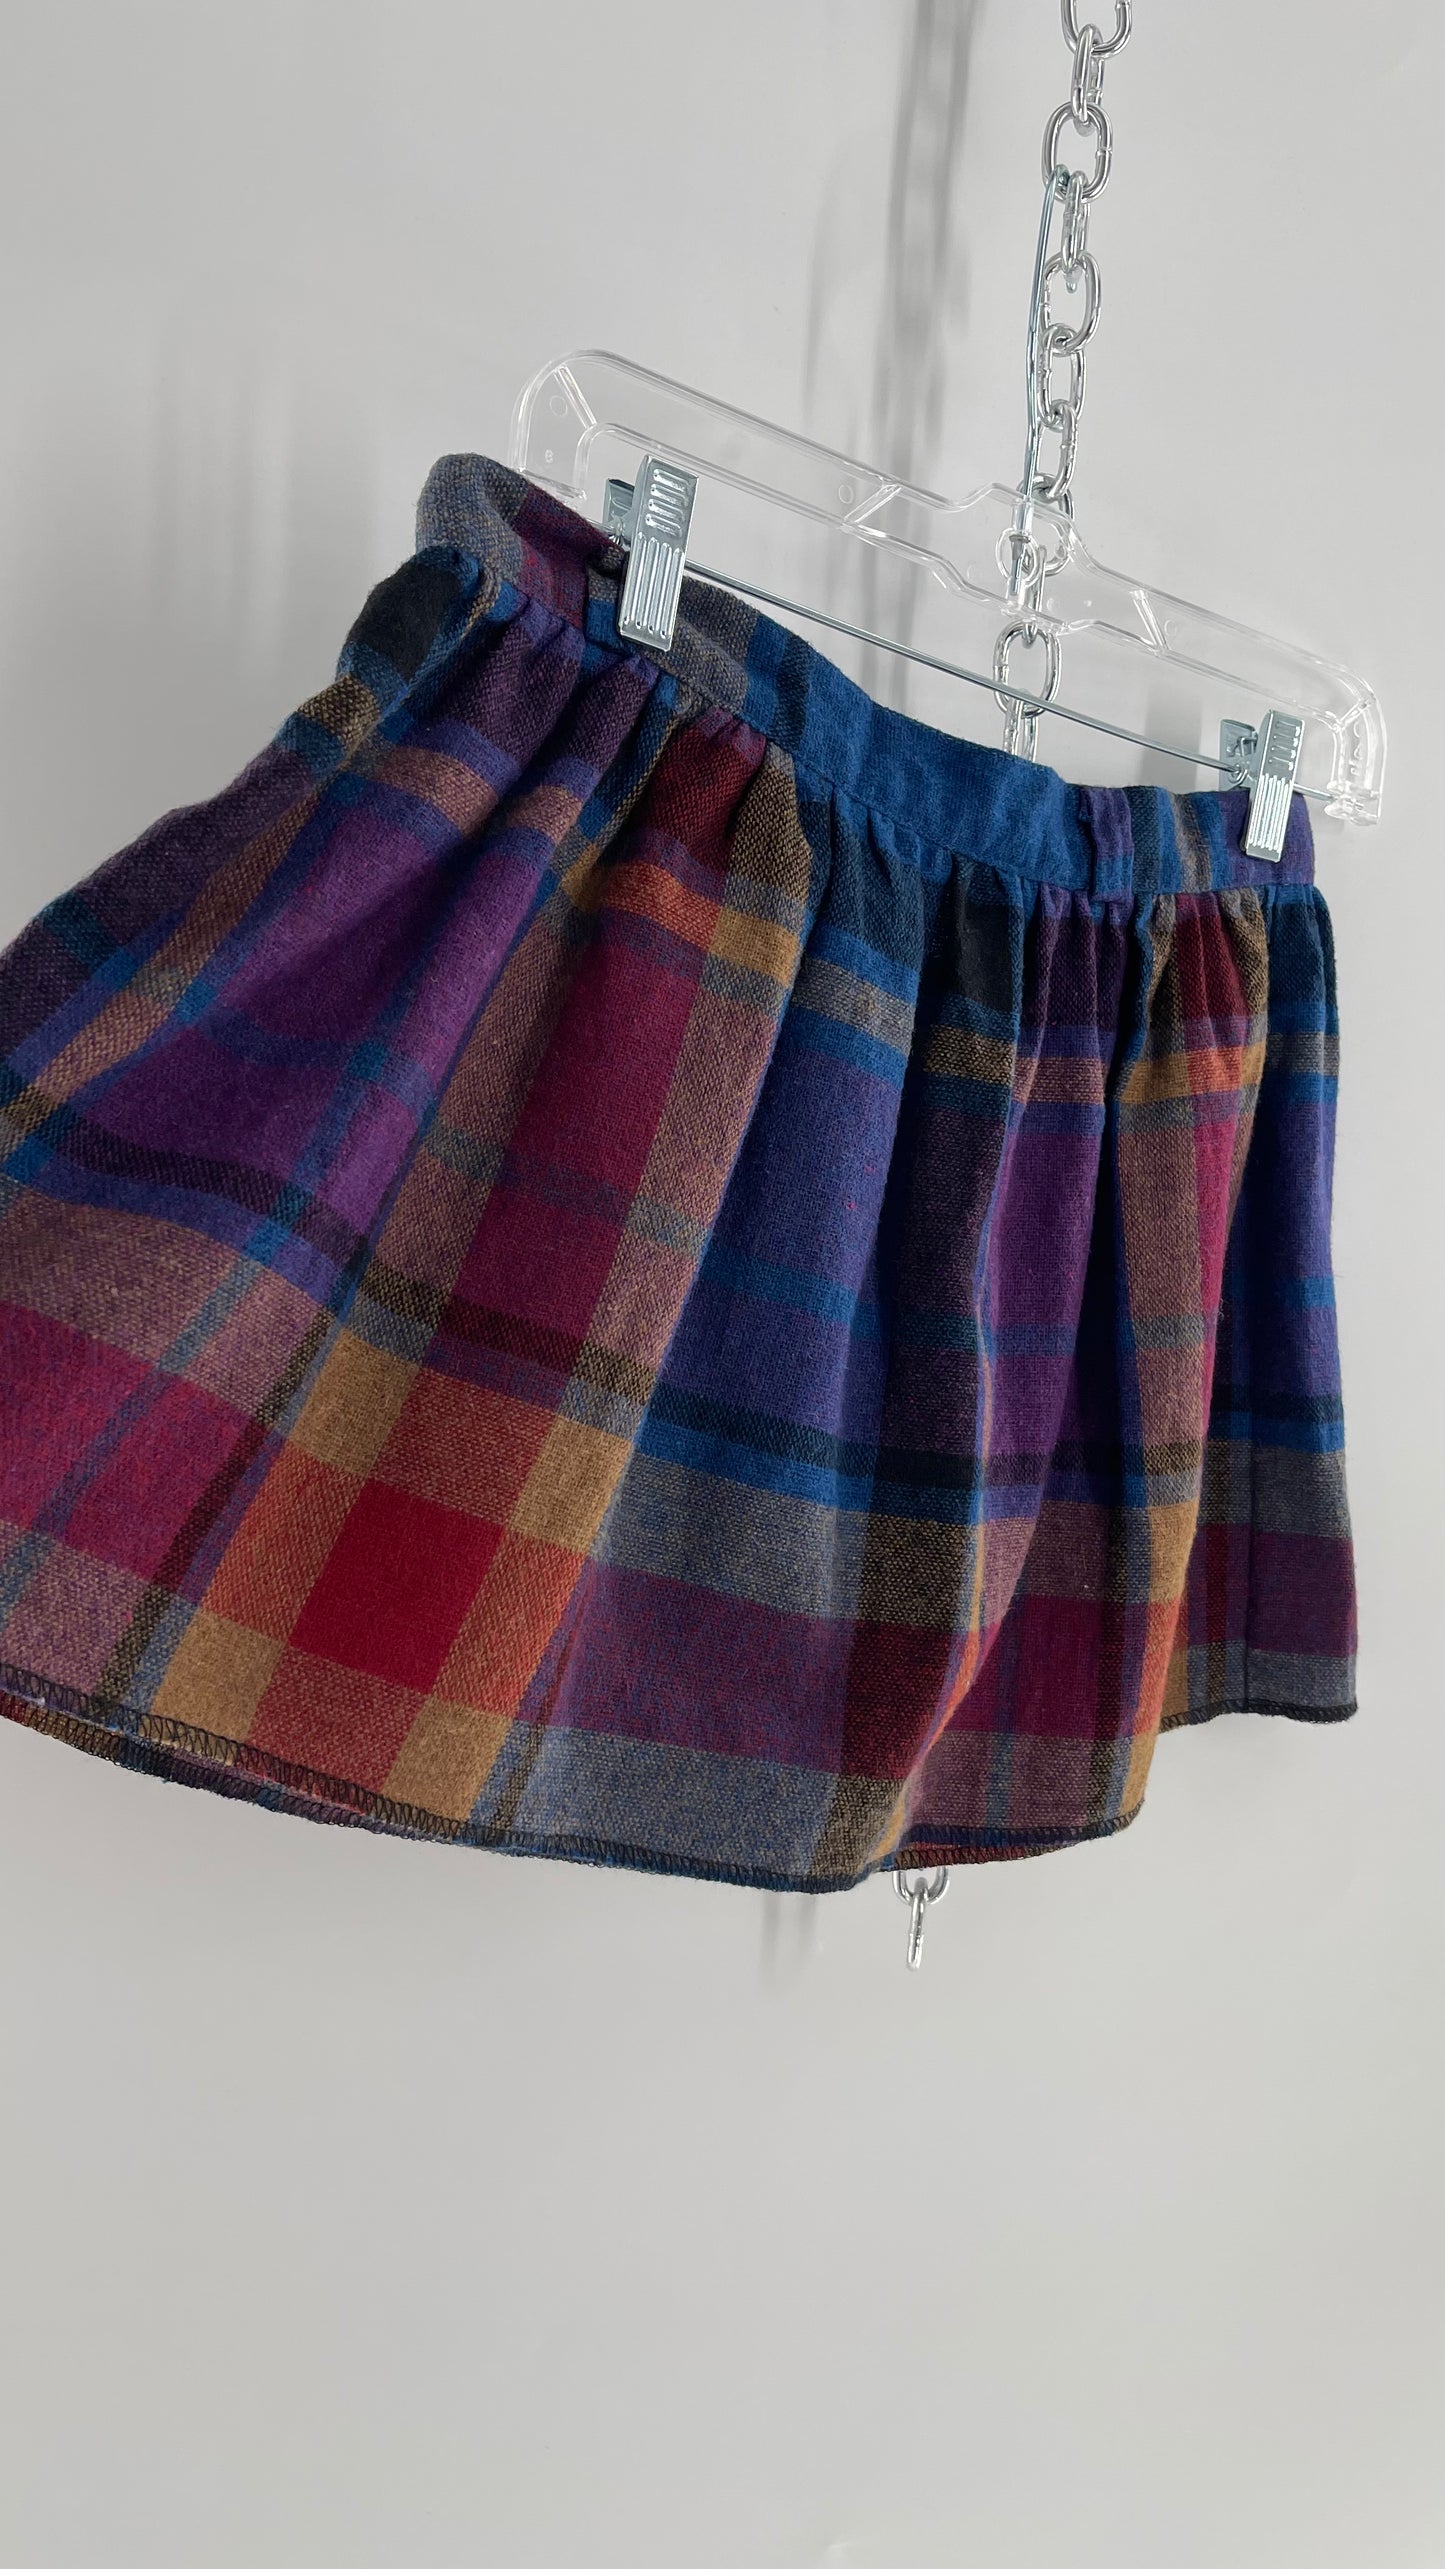 Urban Outfitters Urban Renewal Plaid wool Skirt with Tags Attached (XS)